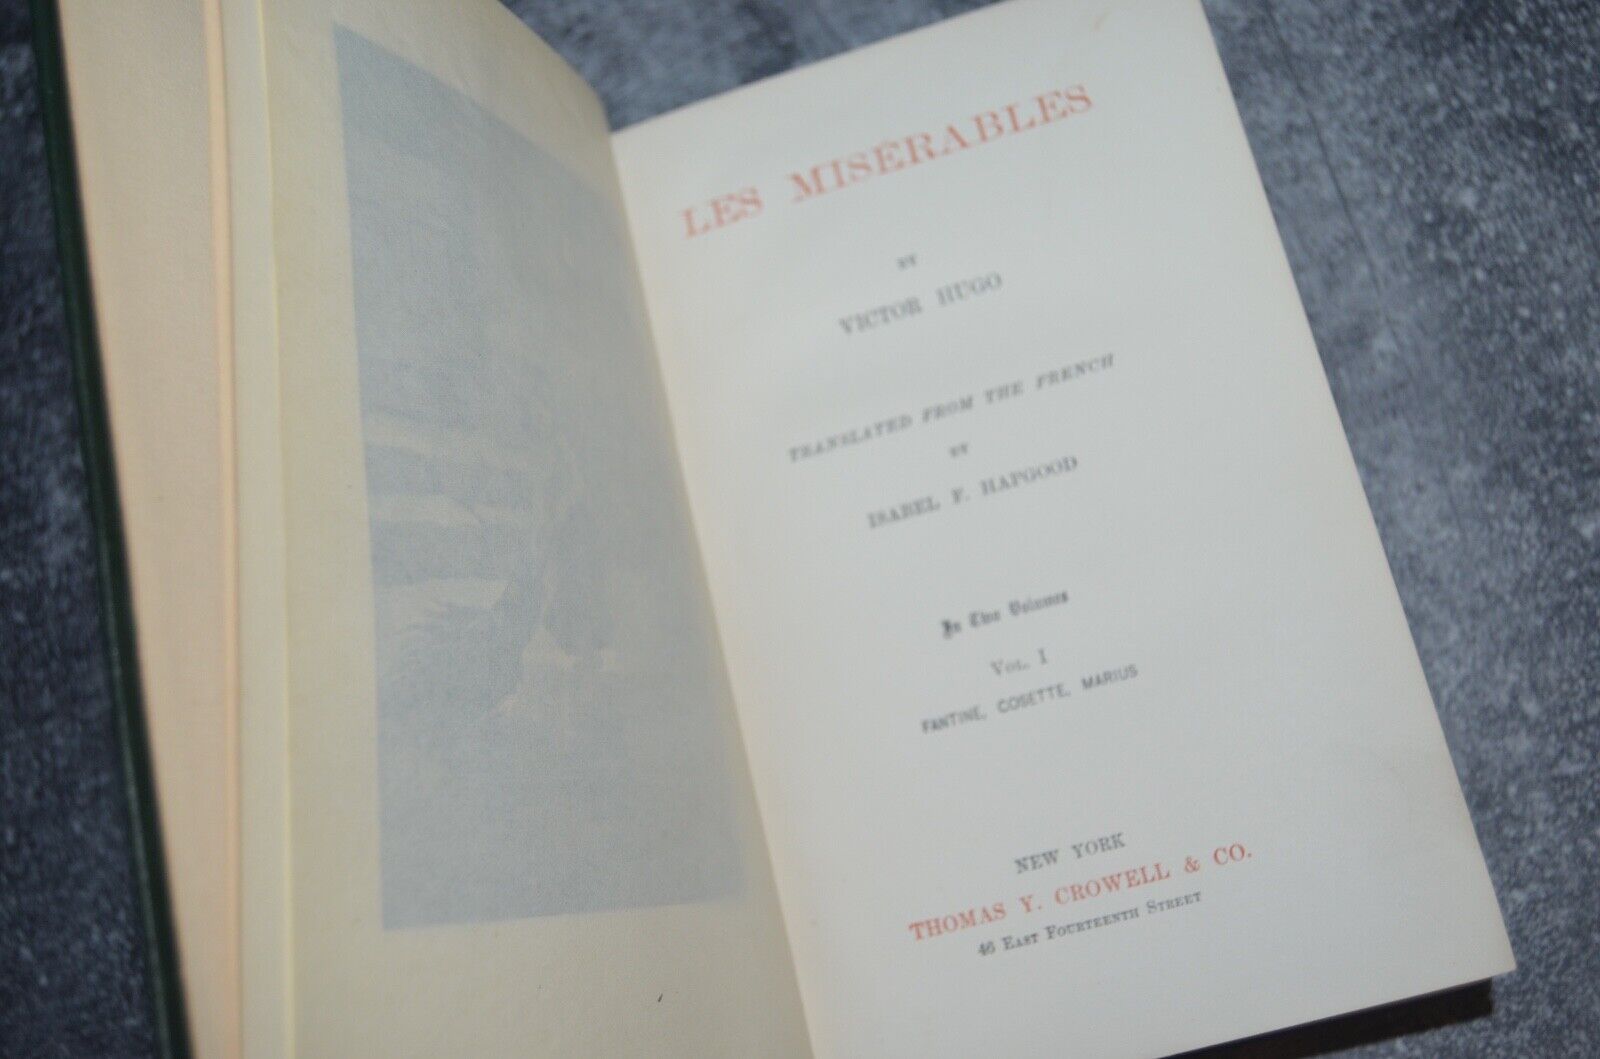 Antique Les Miserables by Victor Hugo 1887 - Brookfield Books